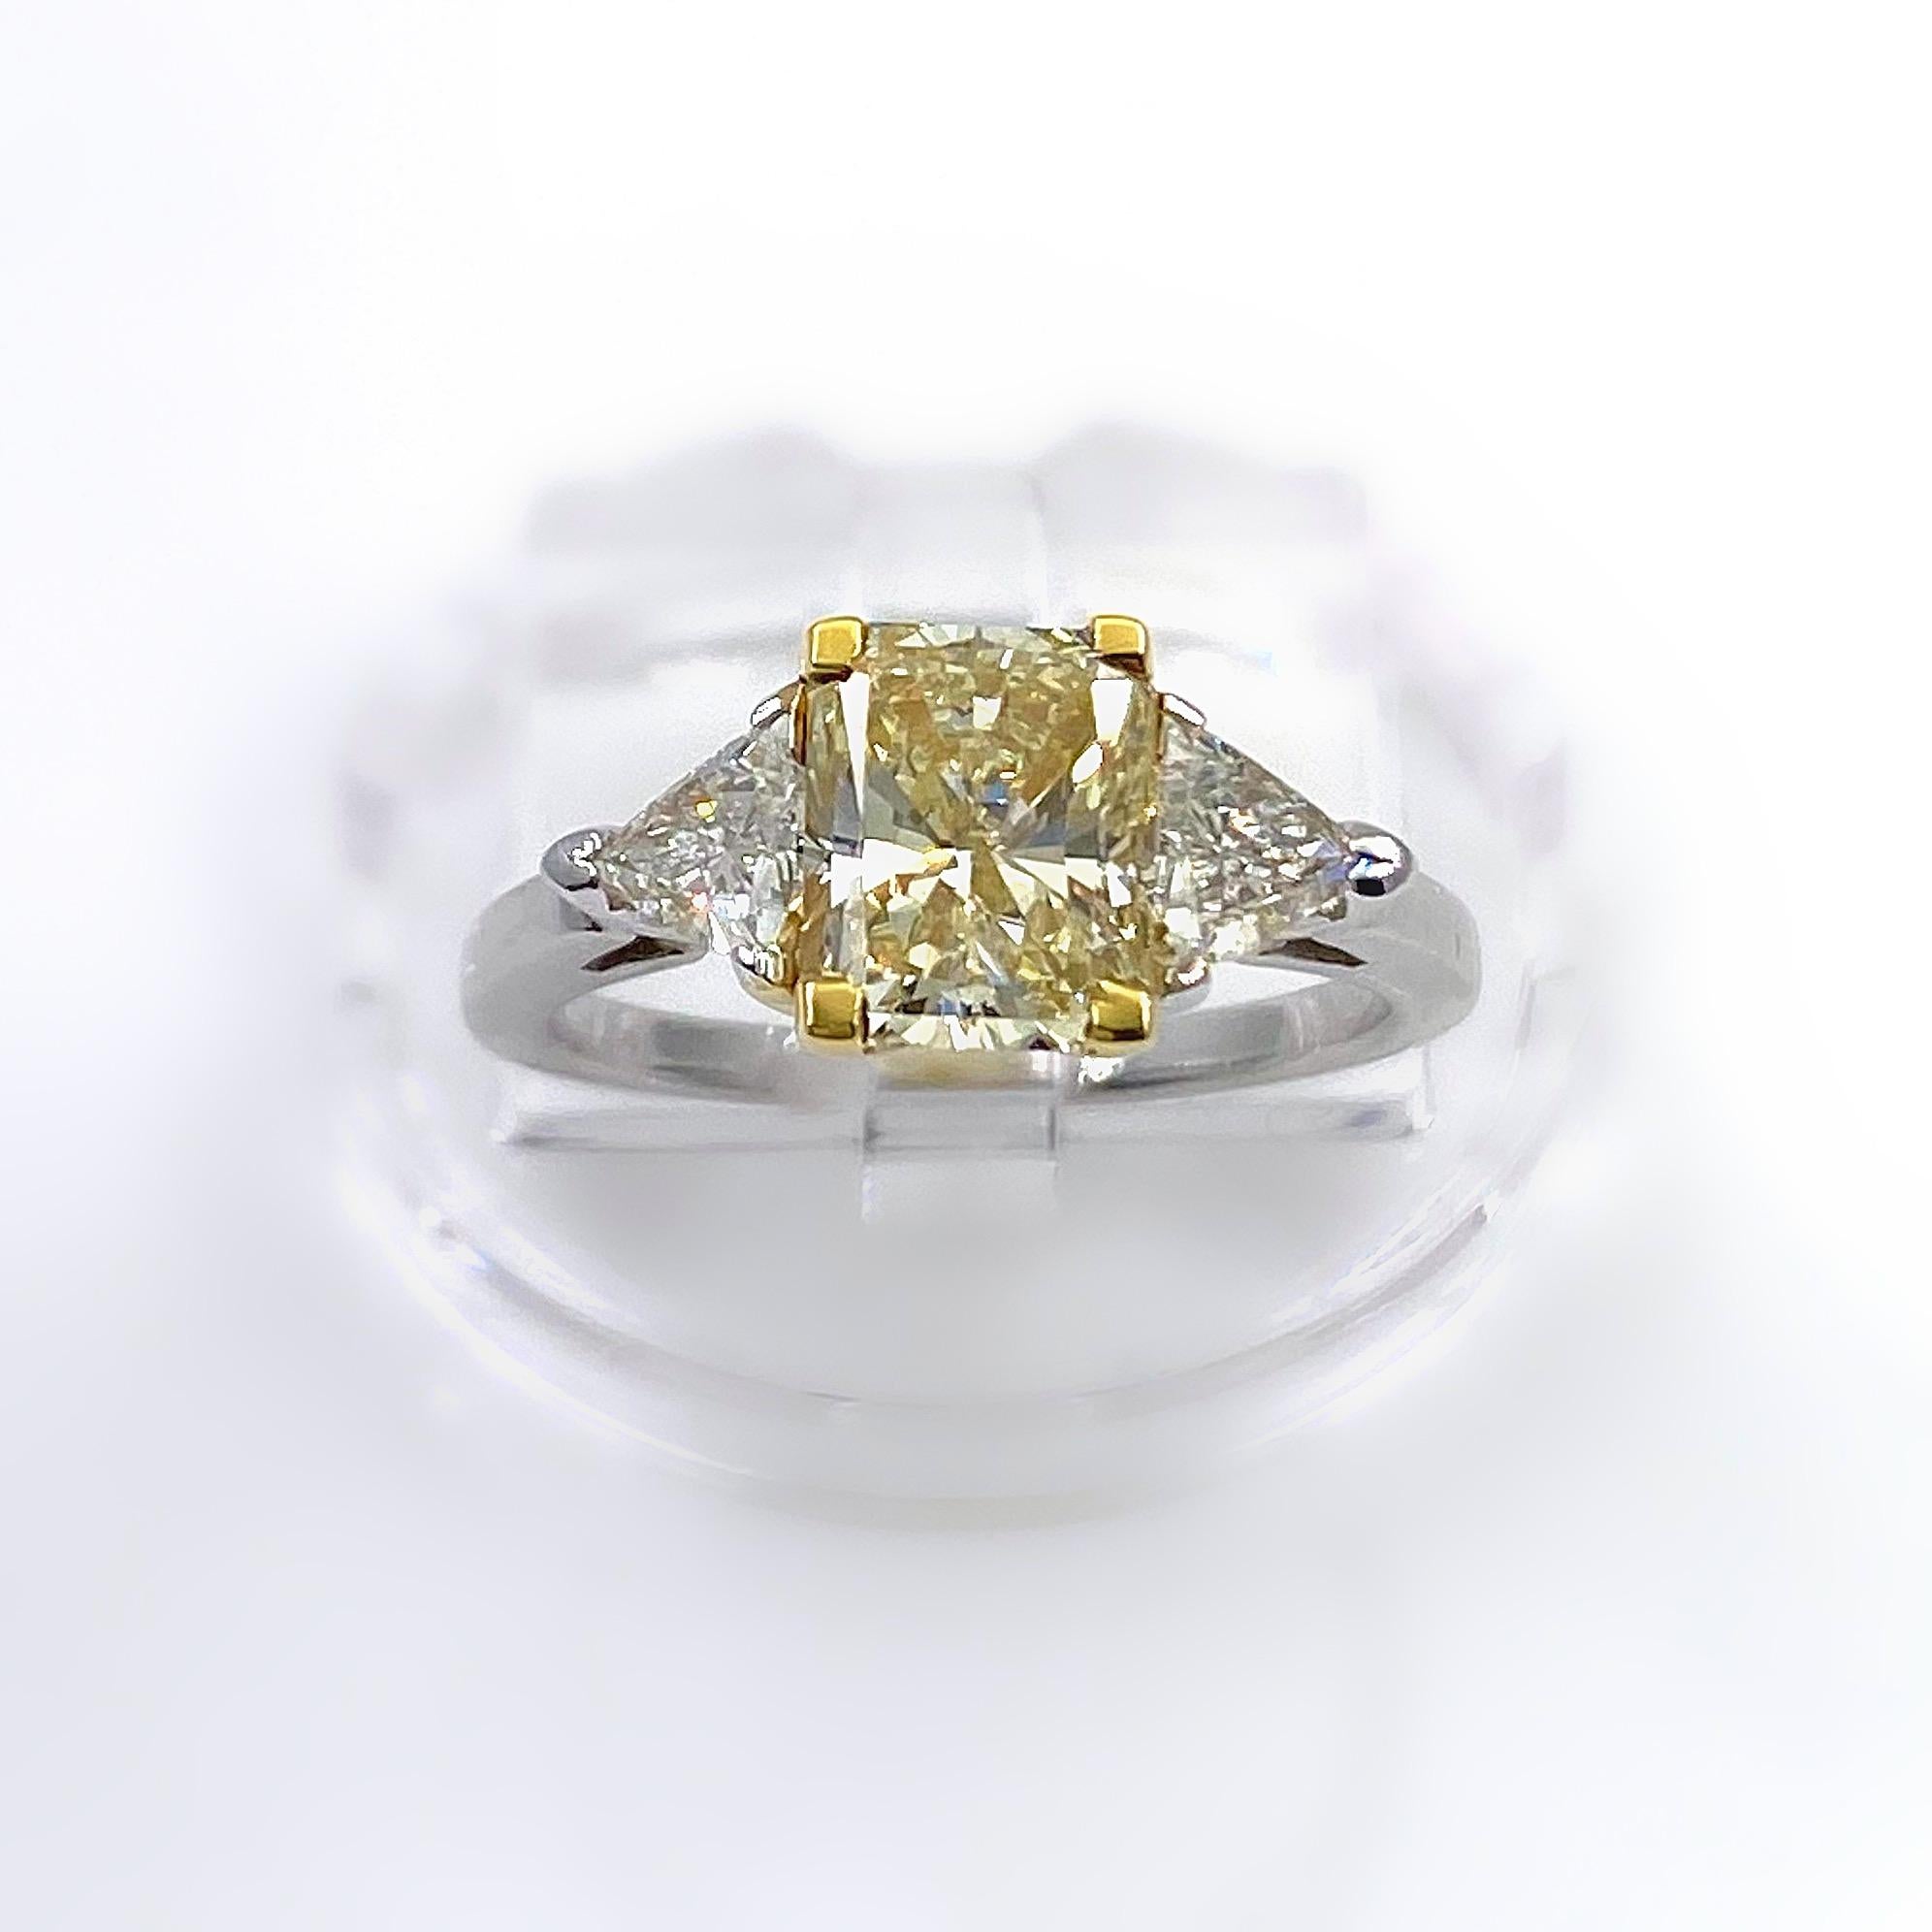 Radiant Diamond Ring
Style:  Fancy Three-Stone Diamond Engagement Ring
Metal:  14K White & Yellow Gold
Size / Measurements:  5, sizable
TCW:  2.11 Carats Total
Main Diamond:  1.61 Carat Radiant Cut Diamond
Color & Clarity:  Fancy Light Yellow,  VS1